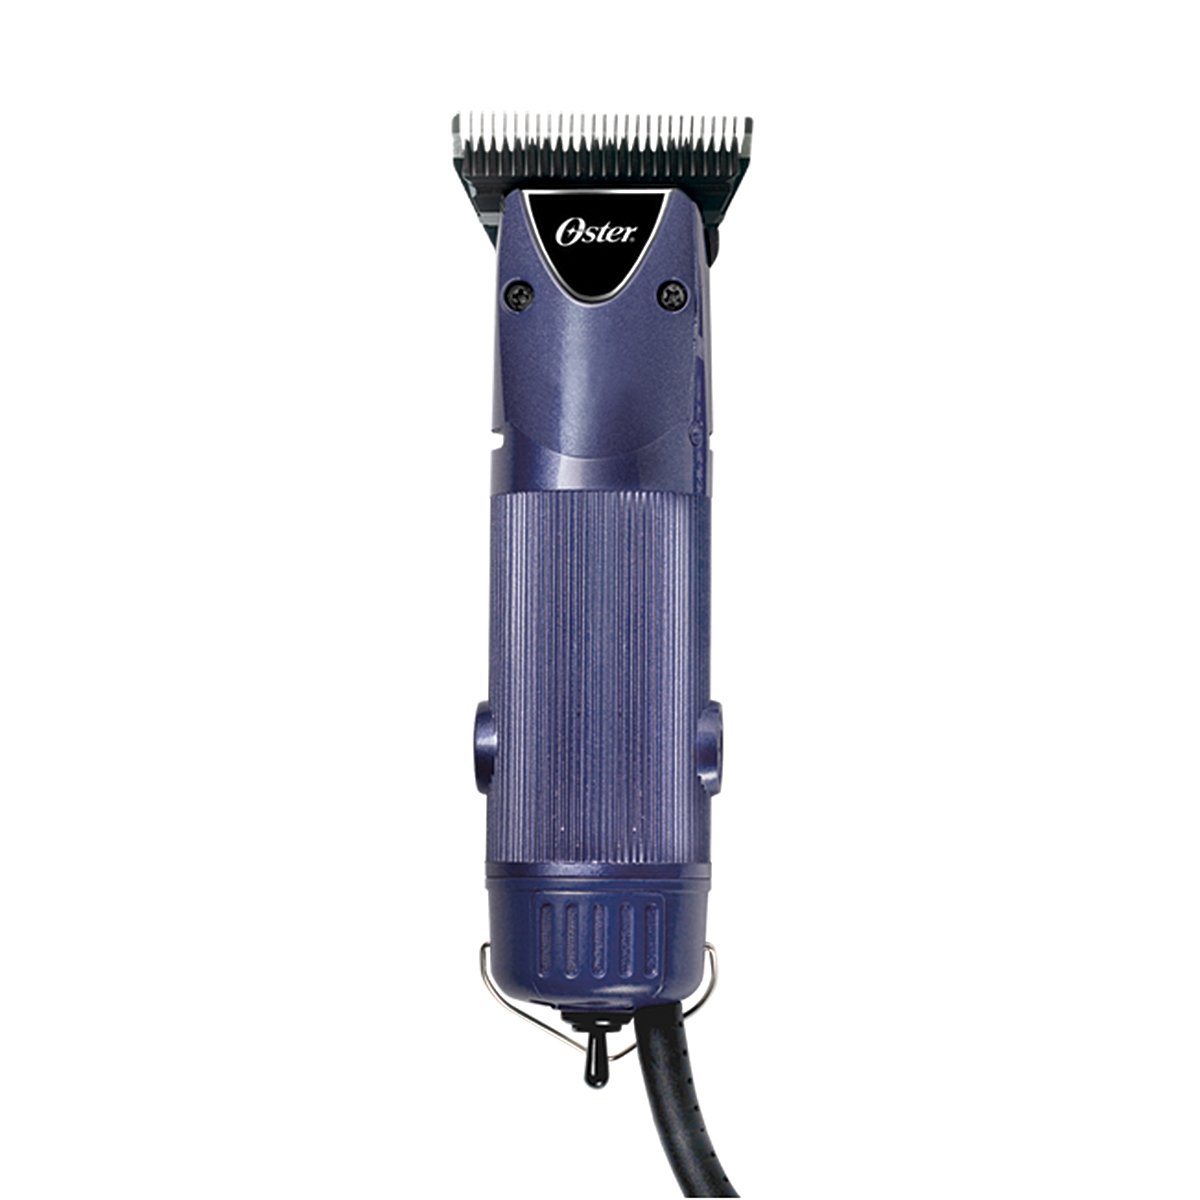 Oster Professional Turbo A5 Heavy Duty Animal Grooming Clippers 